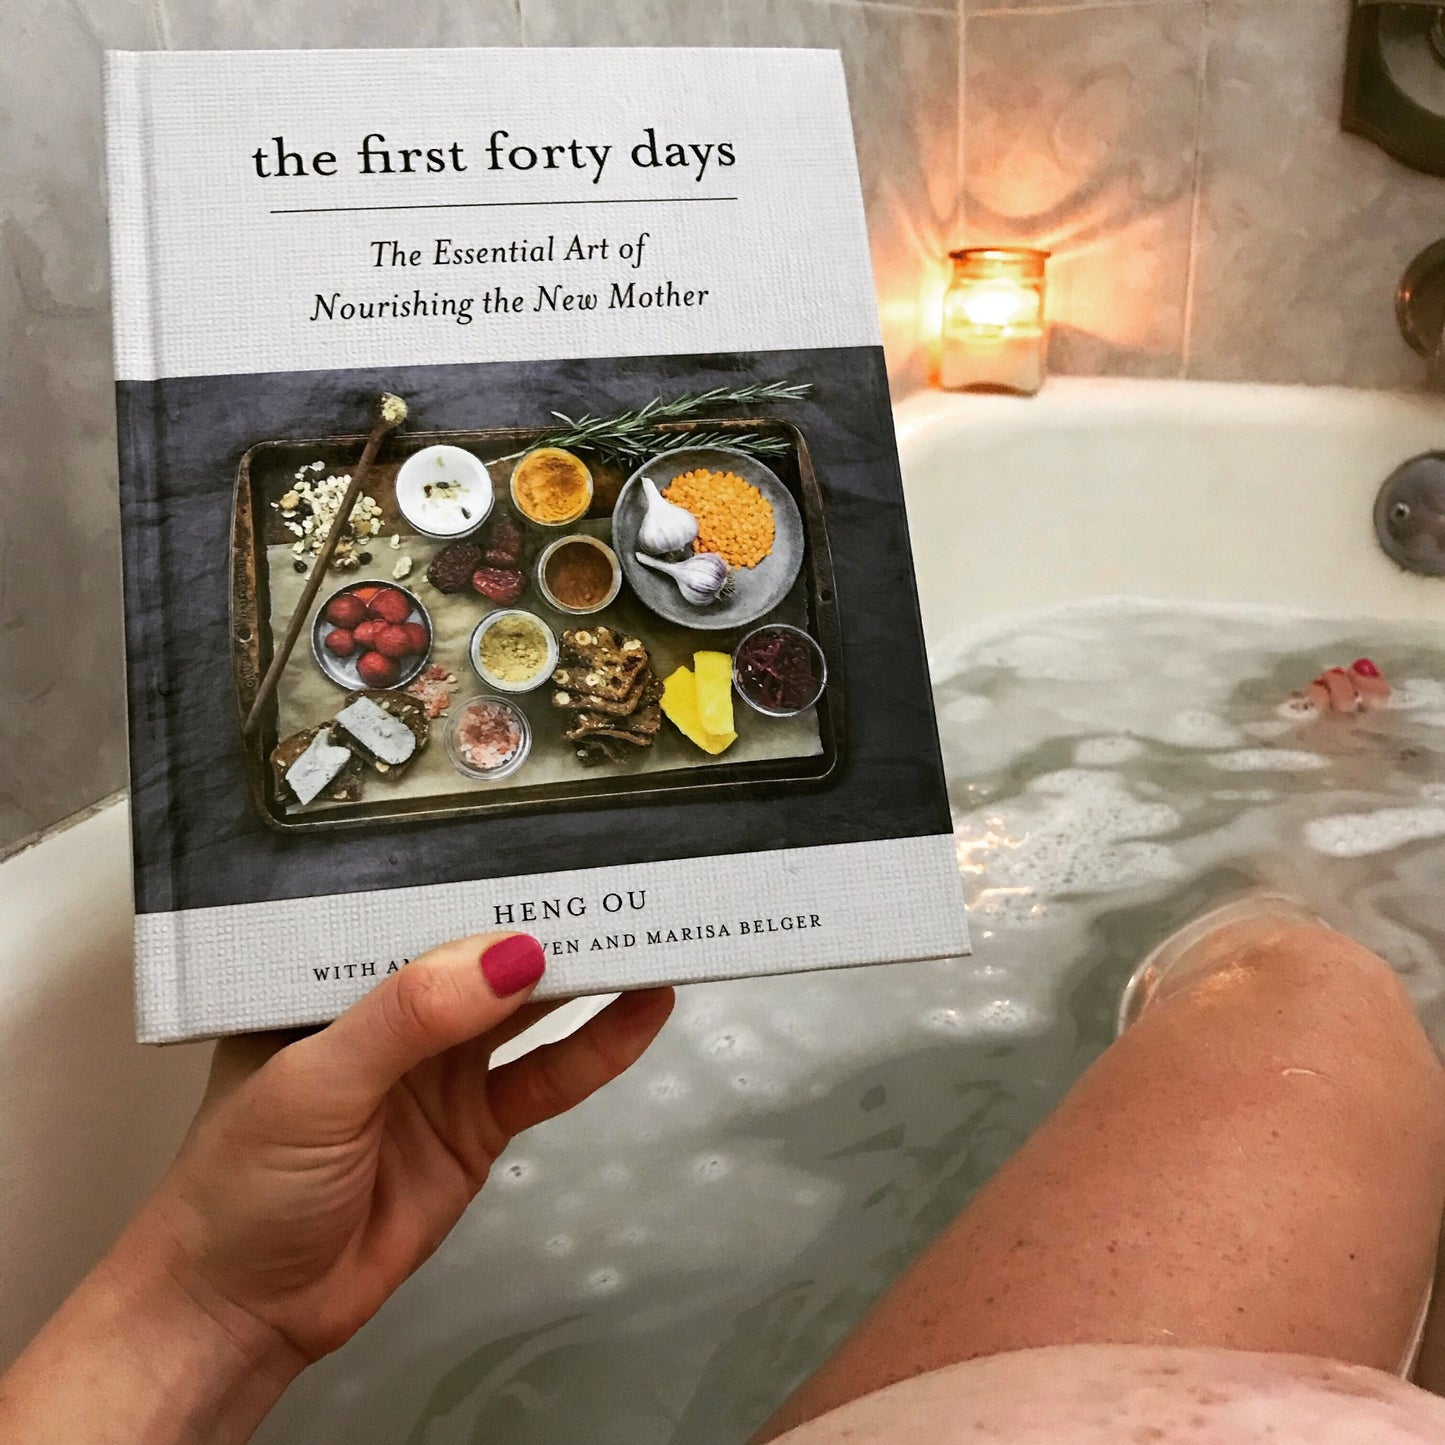 FIRST FORTY DAYS: THE ESSENTIAL ART OF NOURISHING THE NEW MOTHER